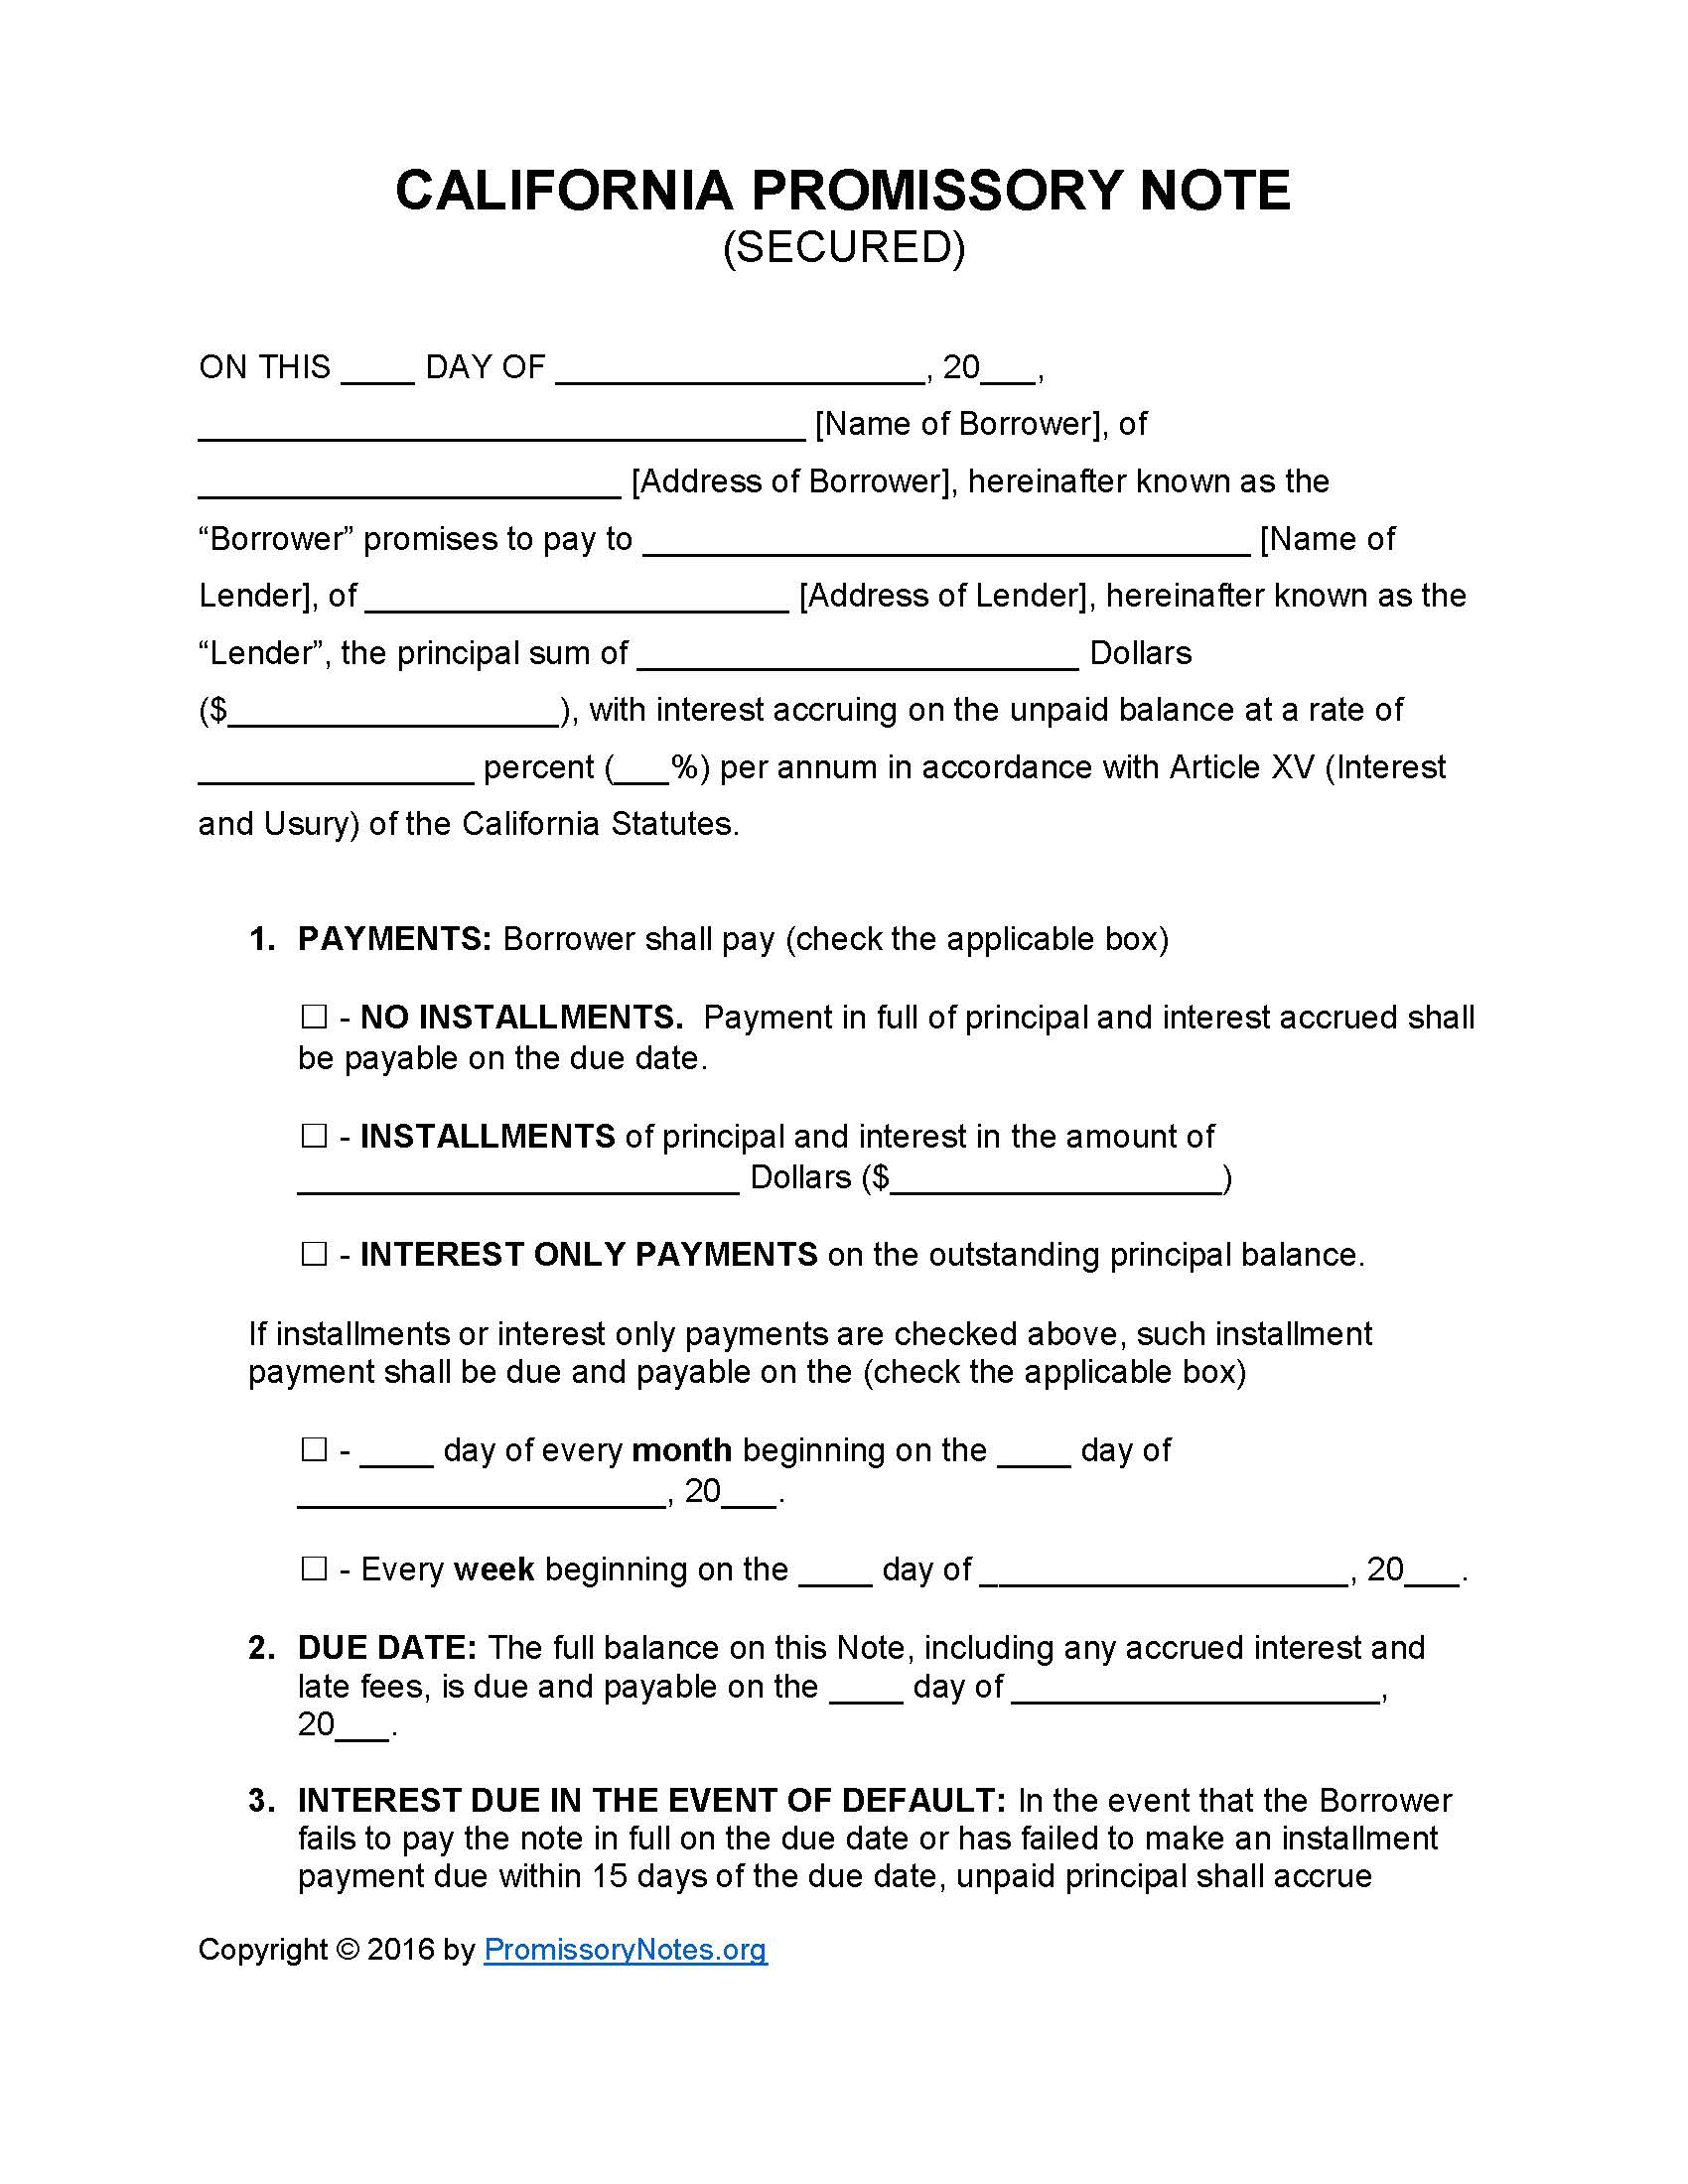 California Secured Promissory Note Template Promissory Notes Promissory Notes